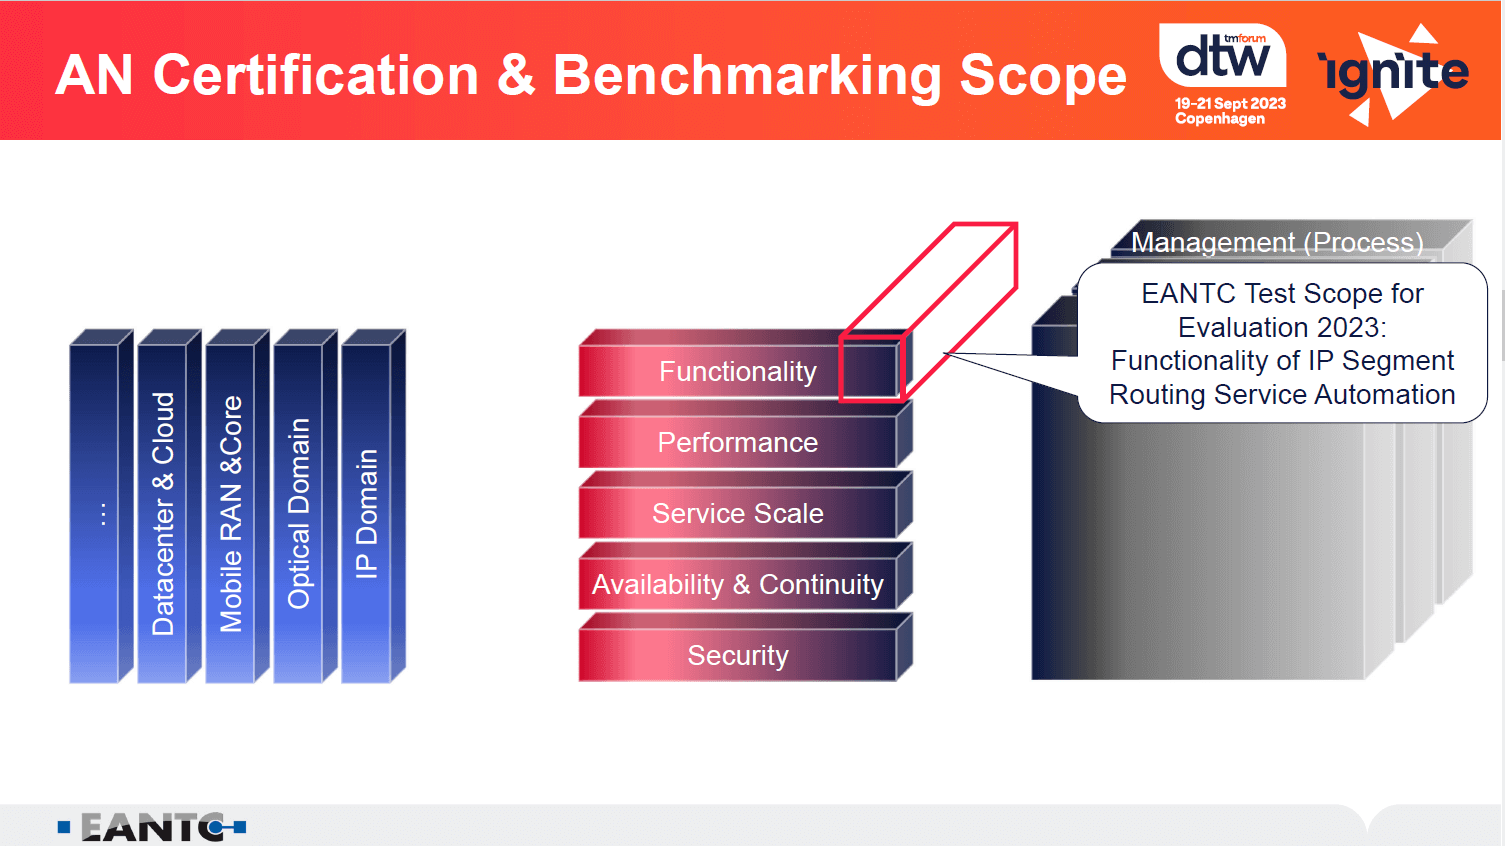 AN certification & benchmarking scope